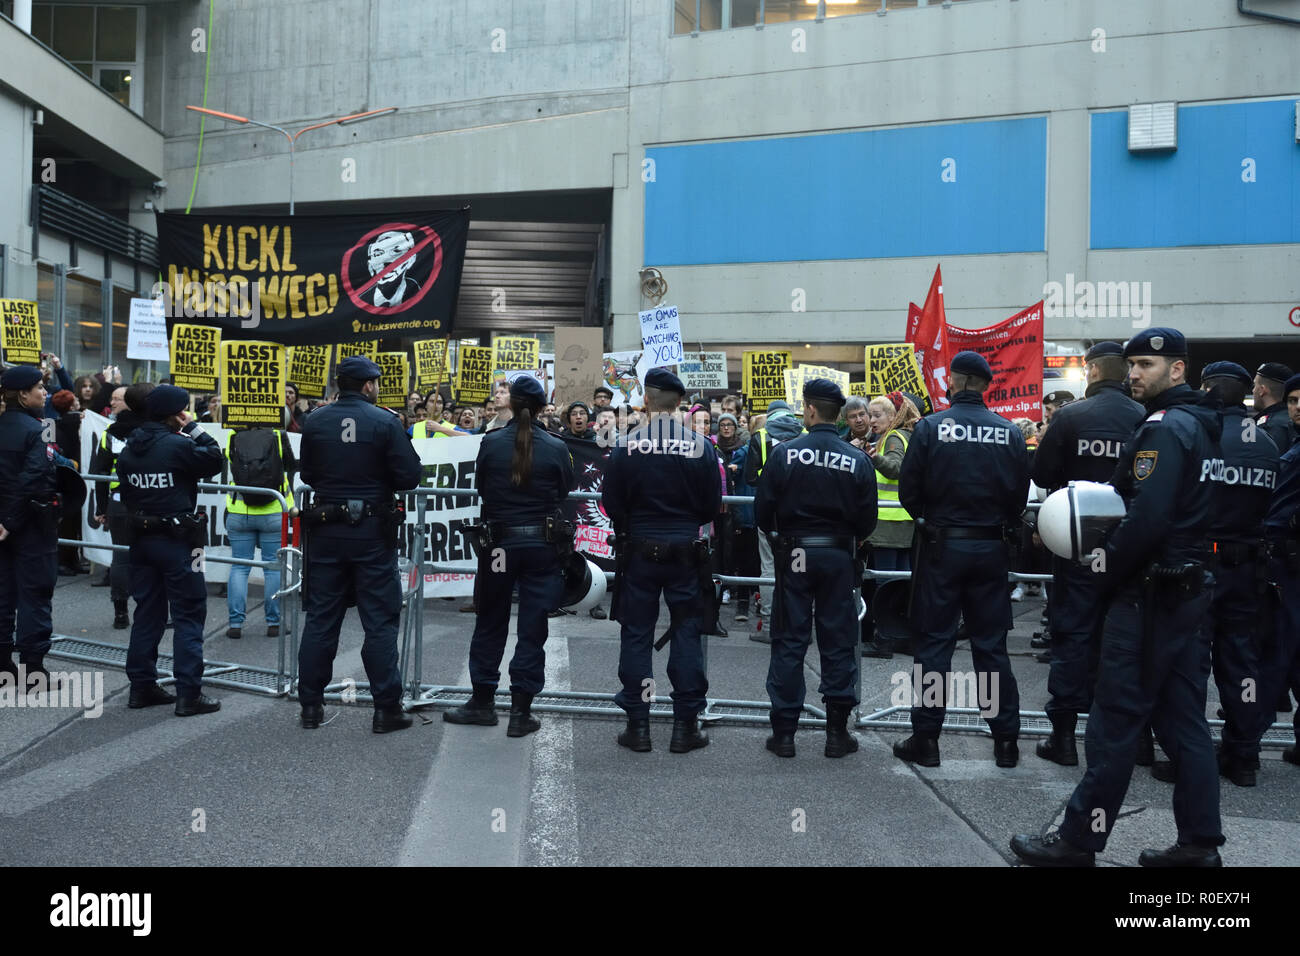 Vienna, Austria. 4 November 2018. Demonstration of the 'Stop the Pact' initiative a demonstration against the UN Migration Pact. Initiator of the platform 'Stop the Pact' is the leader of the 'Identitarian Movement Austria'. Picture shows left counter demonstrators. Credit: Franz Perc / Alamy Live News Stock Photo